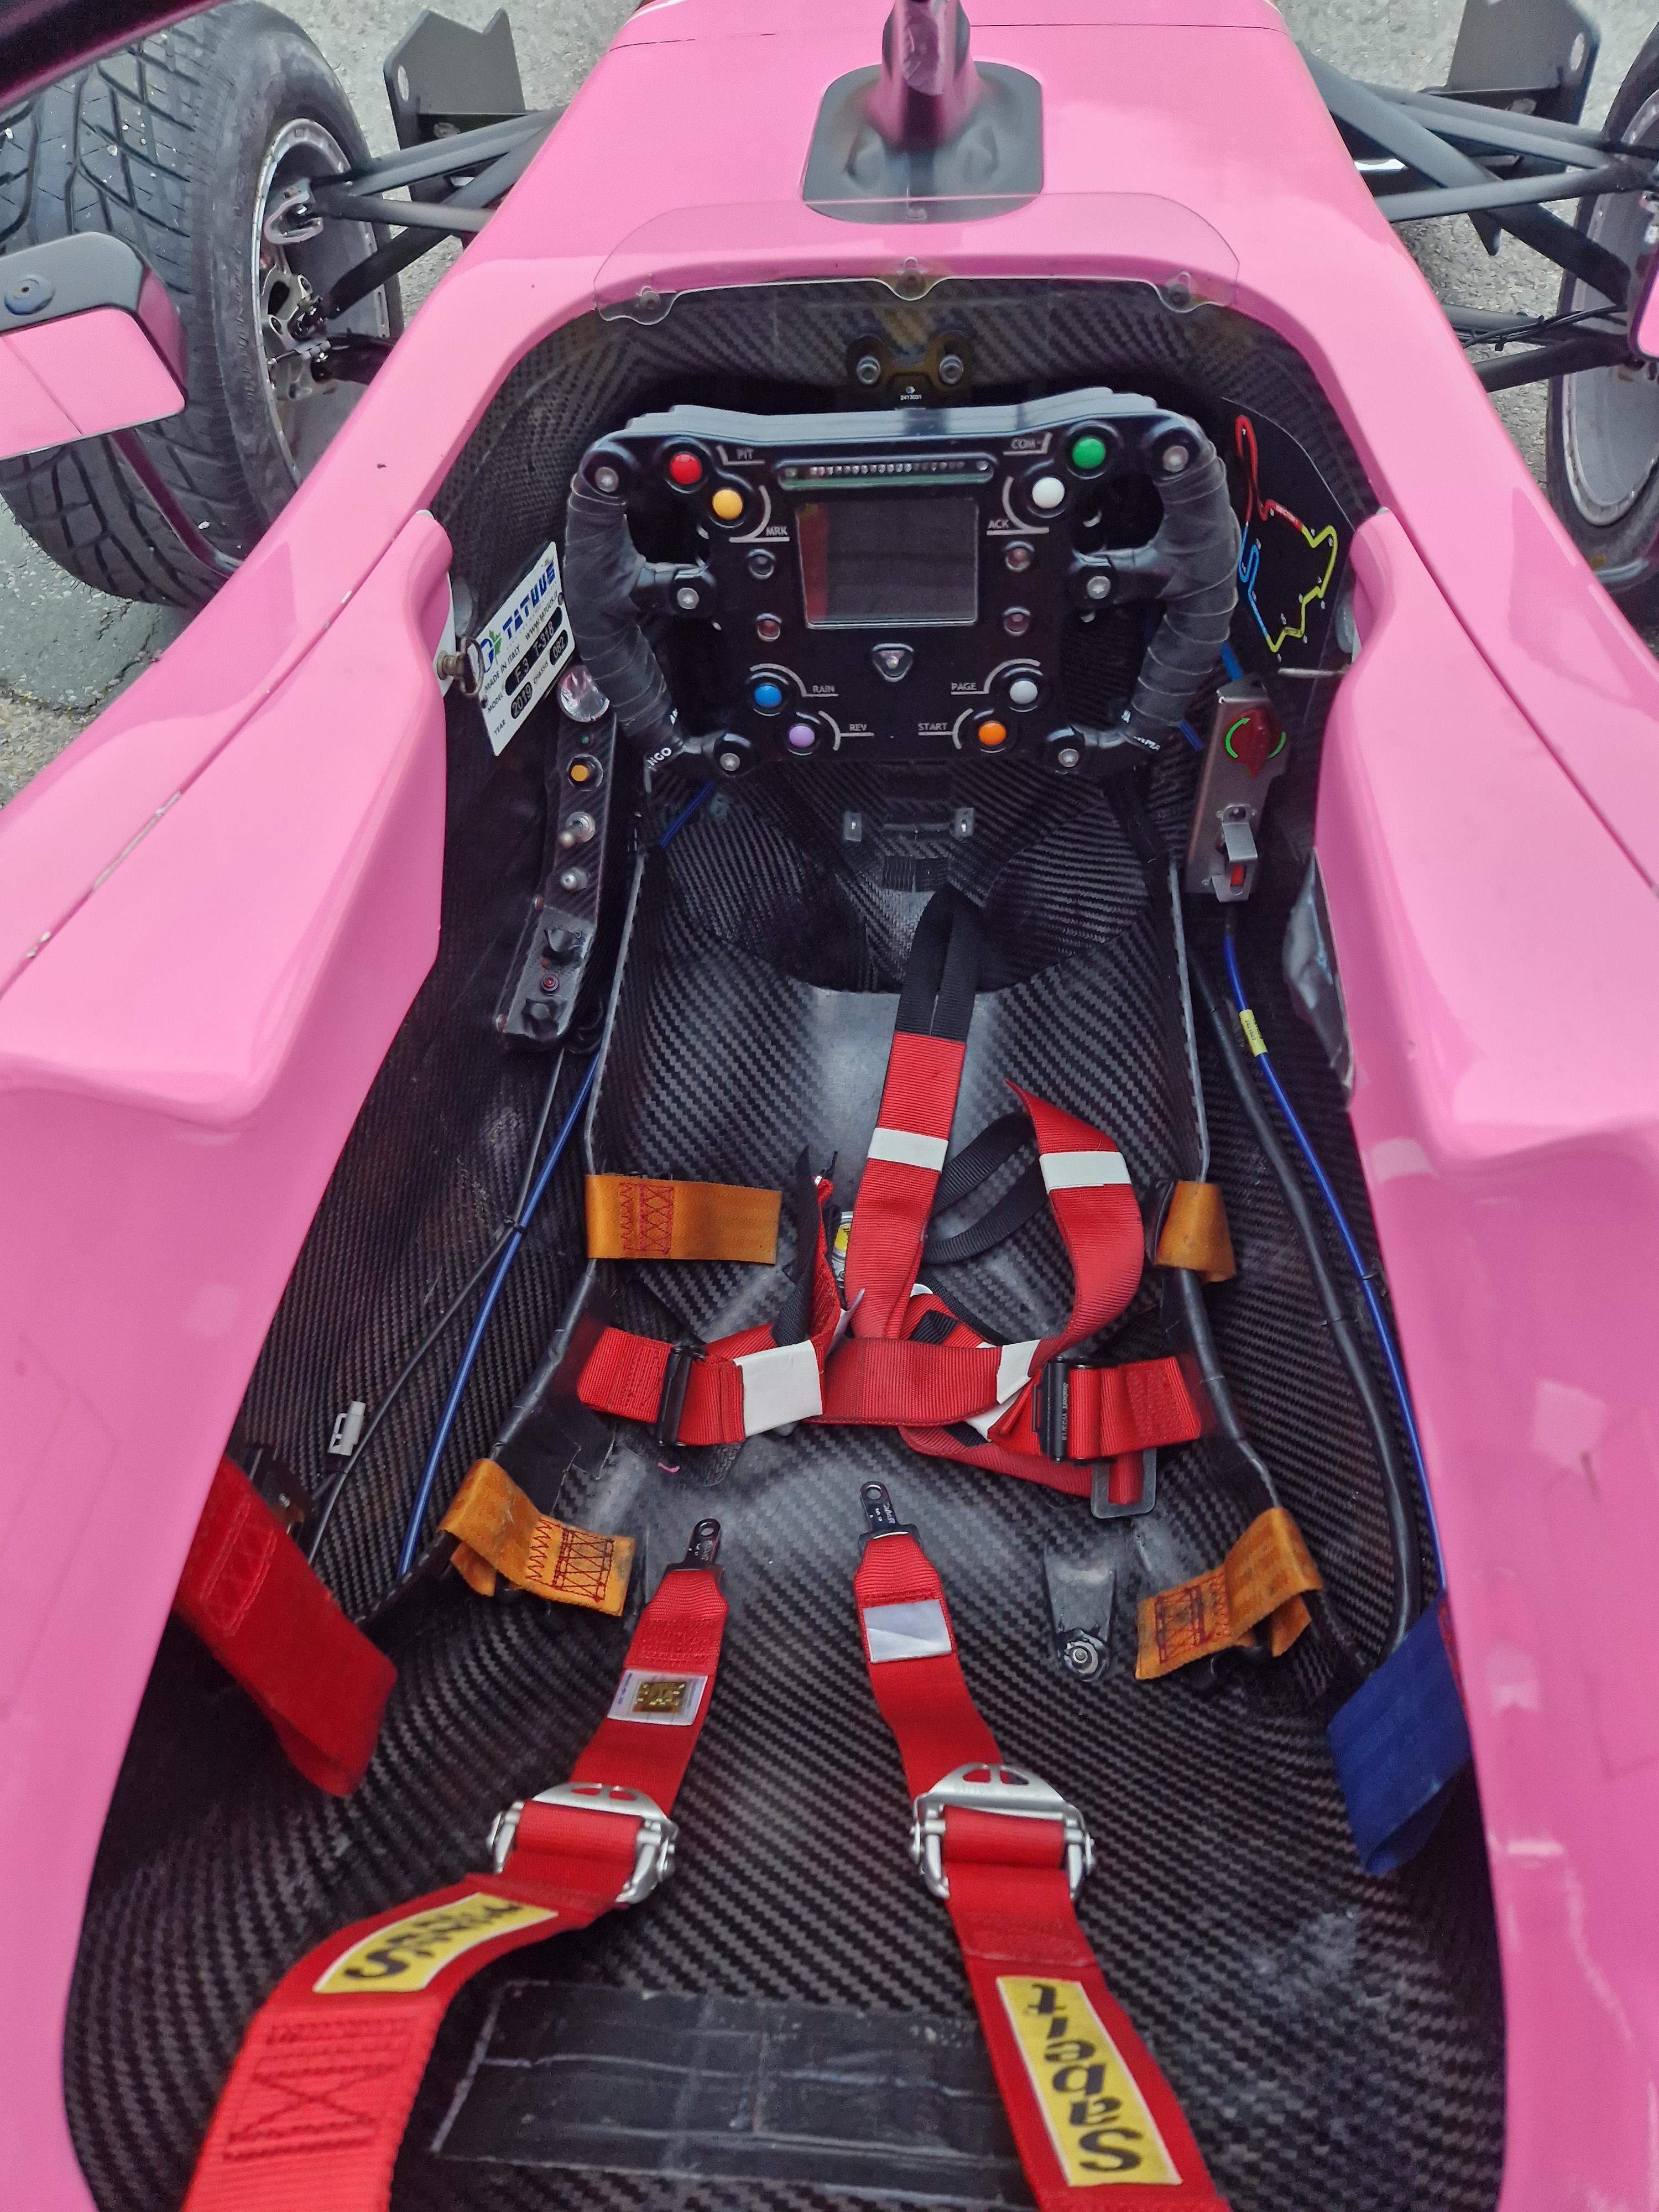 One TATUUS F3 T-318 Alfa Romeo Race Car Chassis No. 082 (2019) Finished in cortDAO Livery as - Image 5 of 10